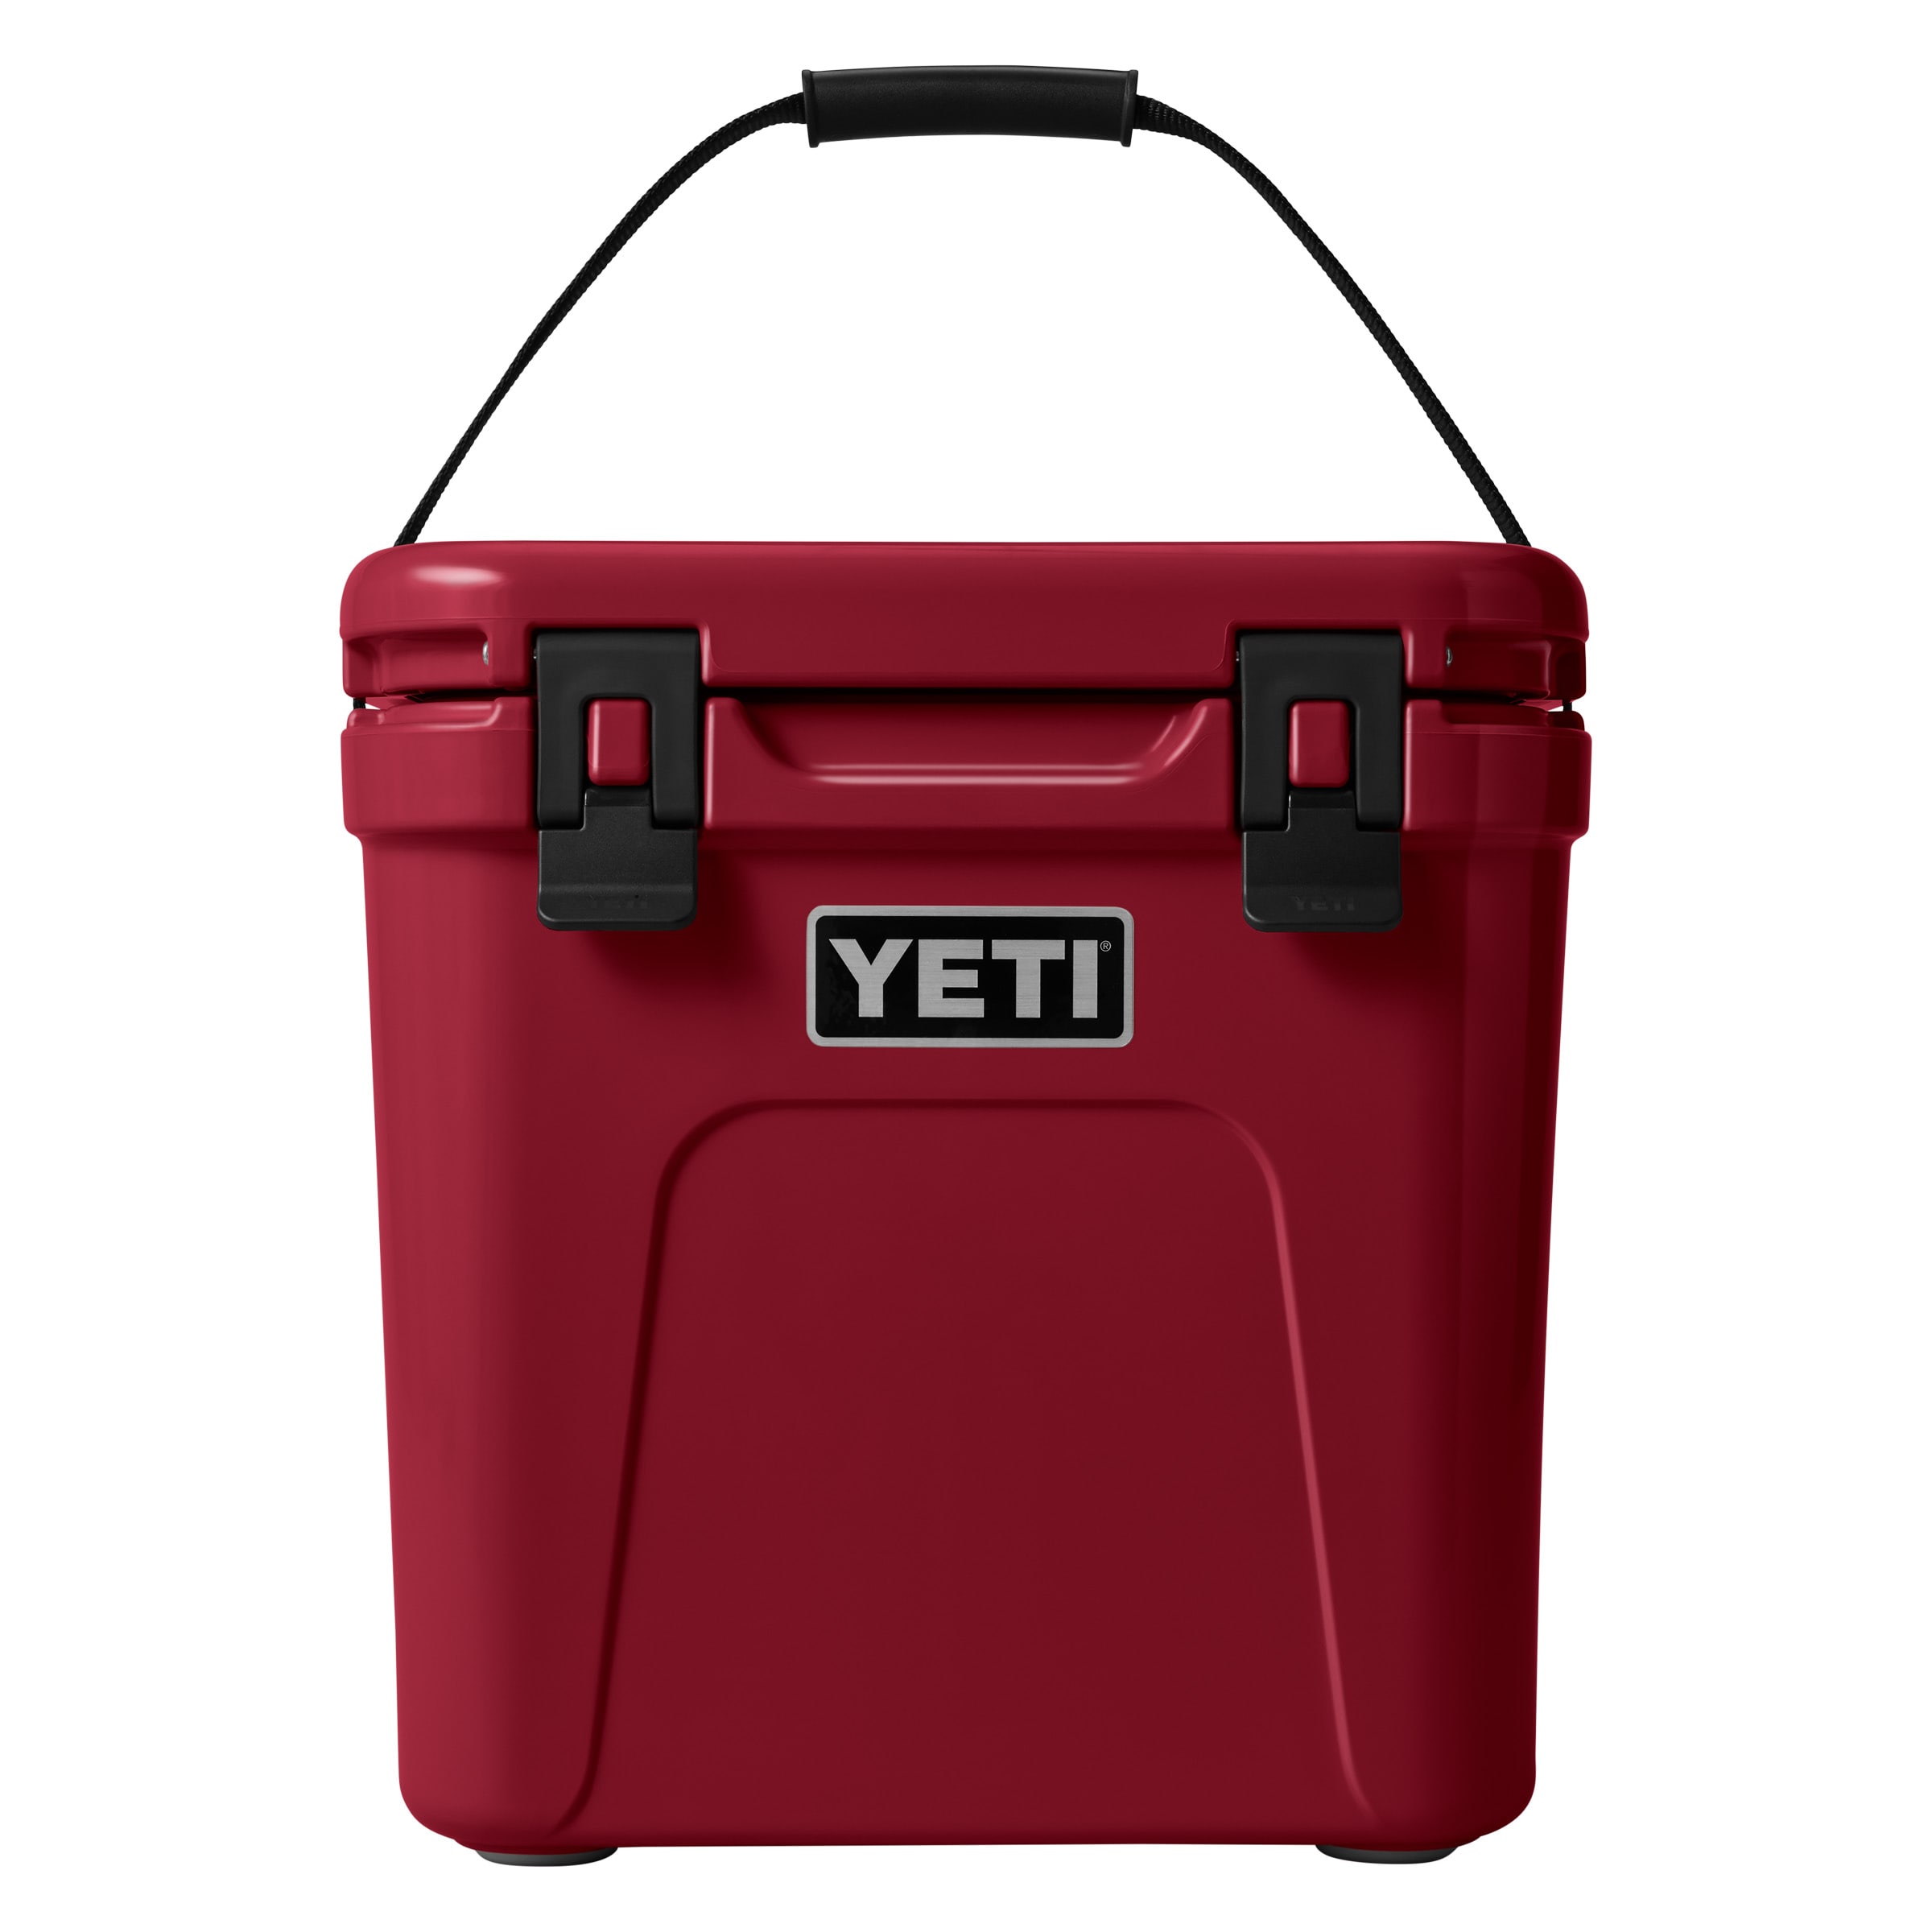 YETI Roadie 24 Insulated Chest Cooler, Harvest Red at Lowes.com